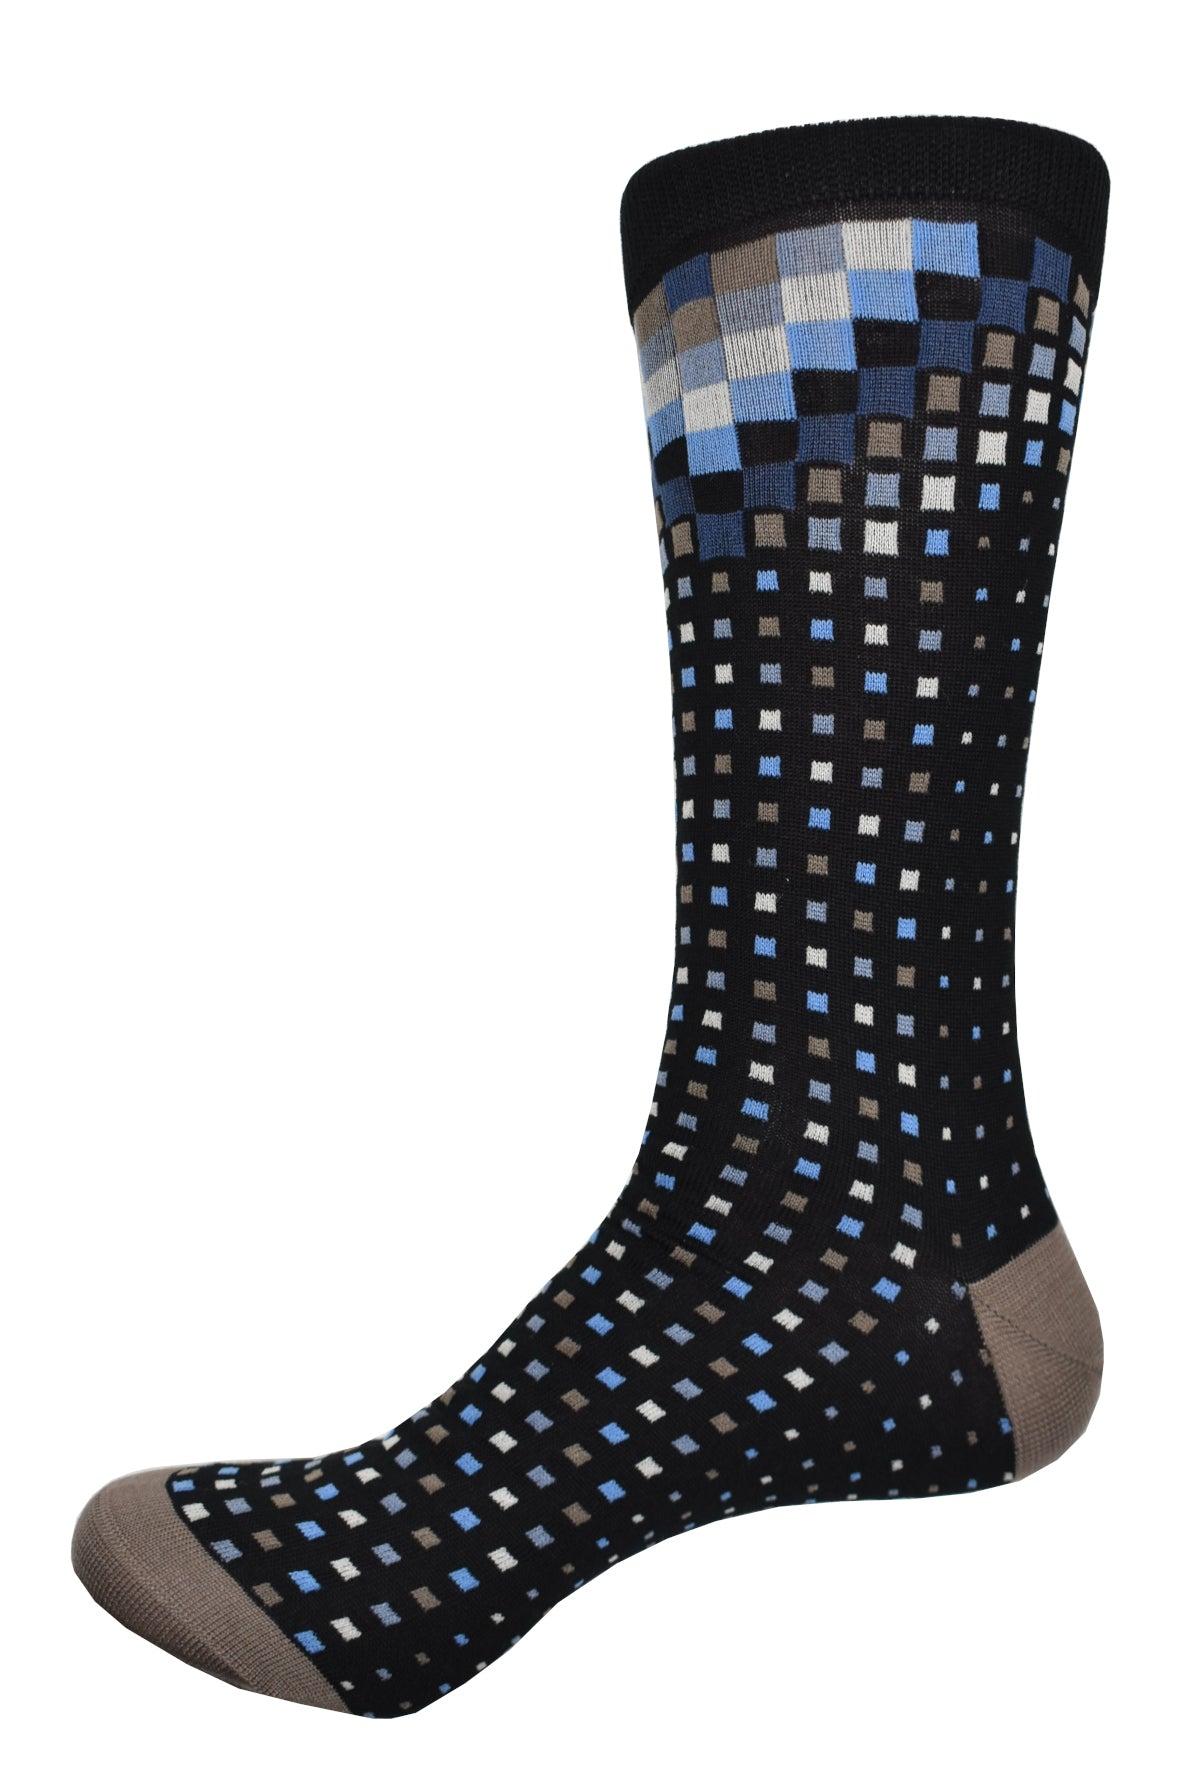 Stay cool and stylish with the Marcello Black Color Blocking socks. Made from 97% mercerized cotton and 3% lycra, this sock features a trendy pattern of color boxes, perfect to pair with any pants or jeans. Enjoy the comfort and versatility of this soft and updated piece.